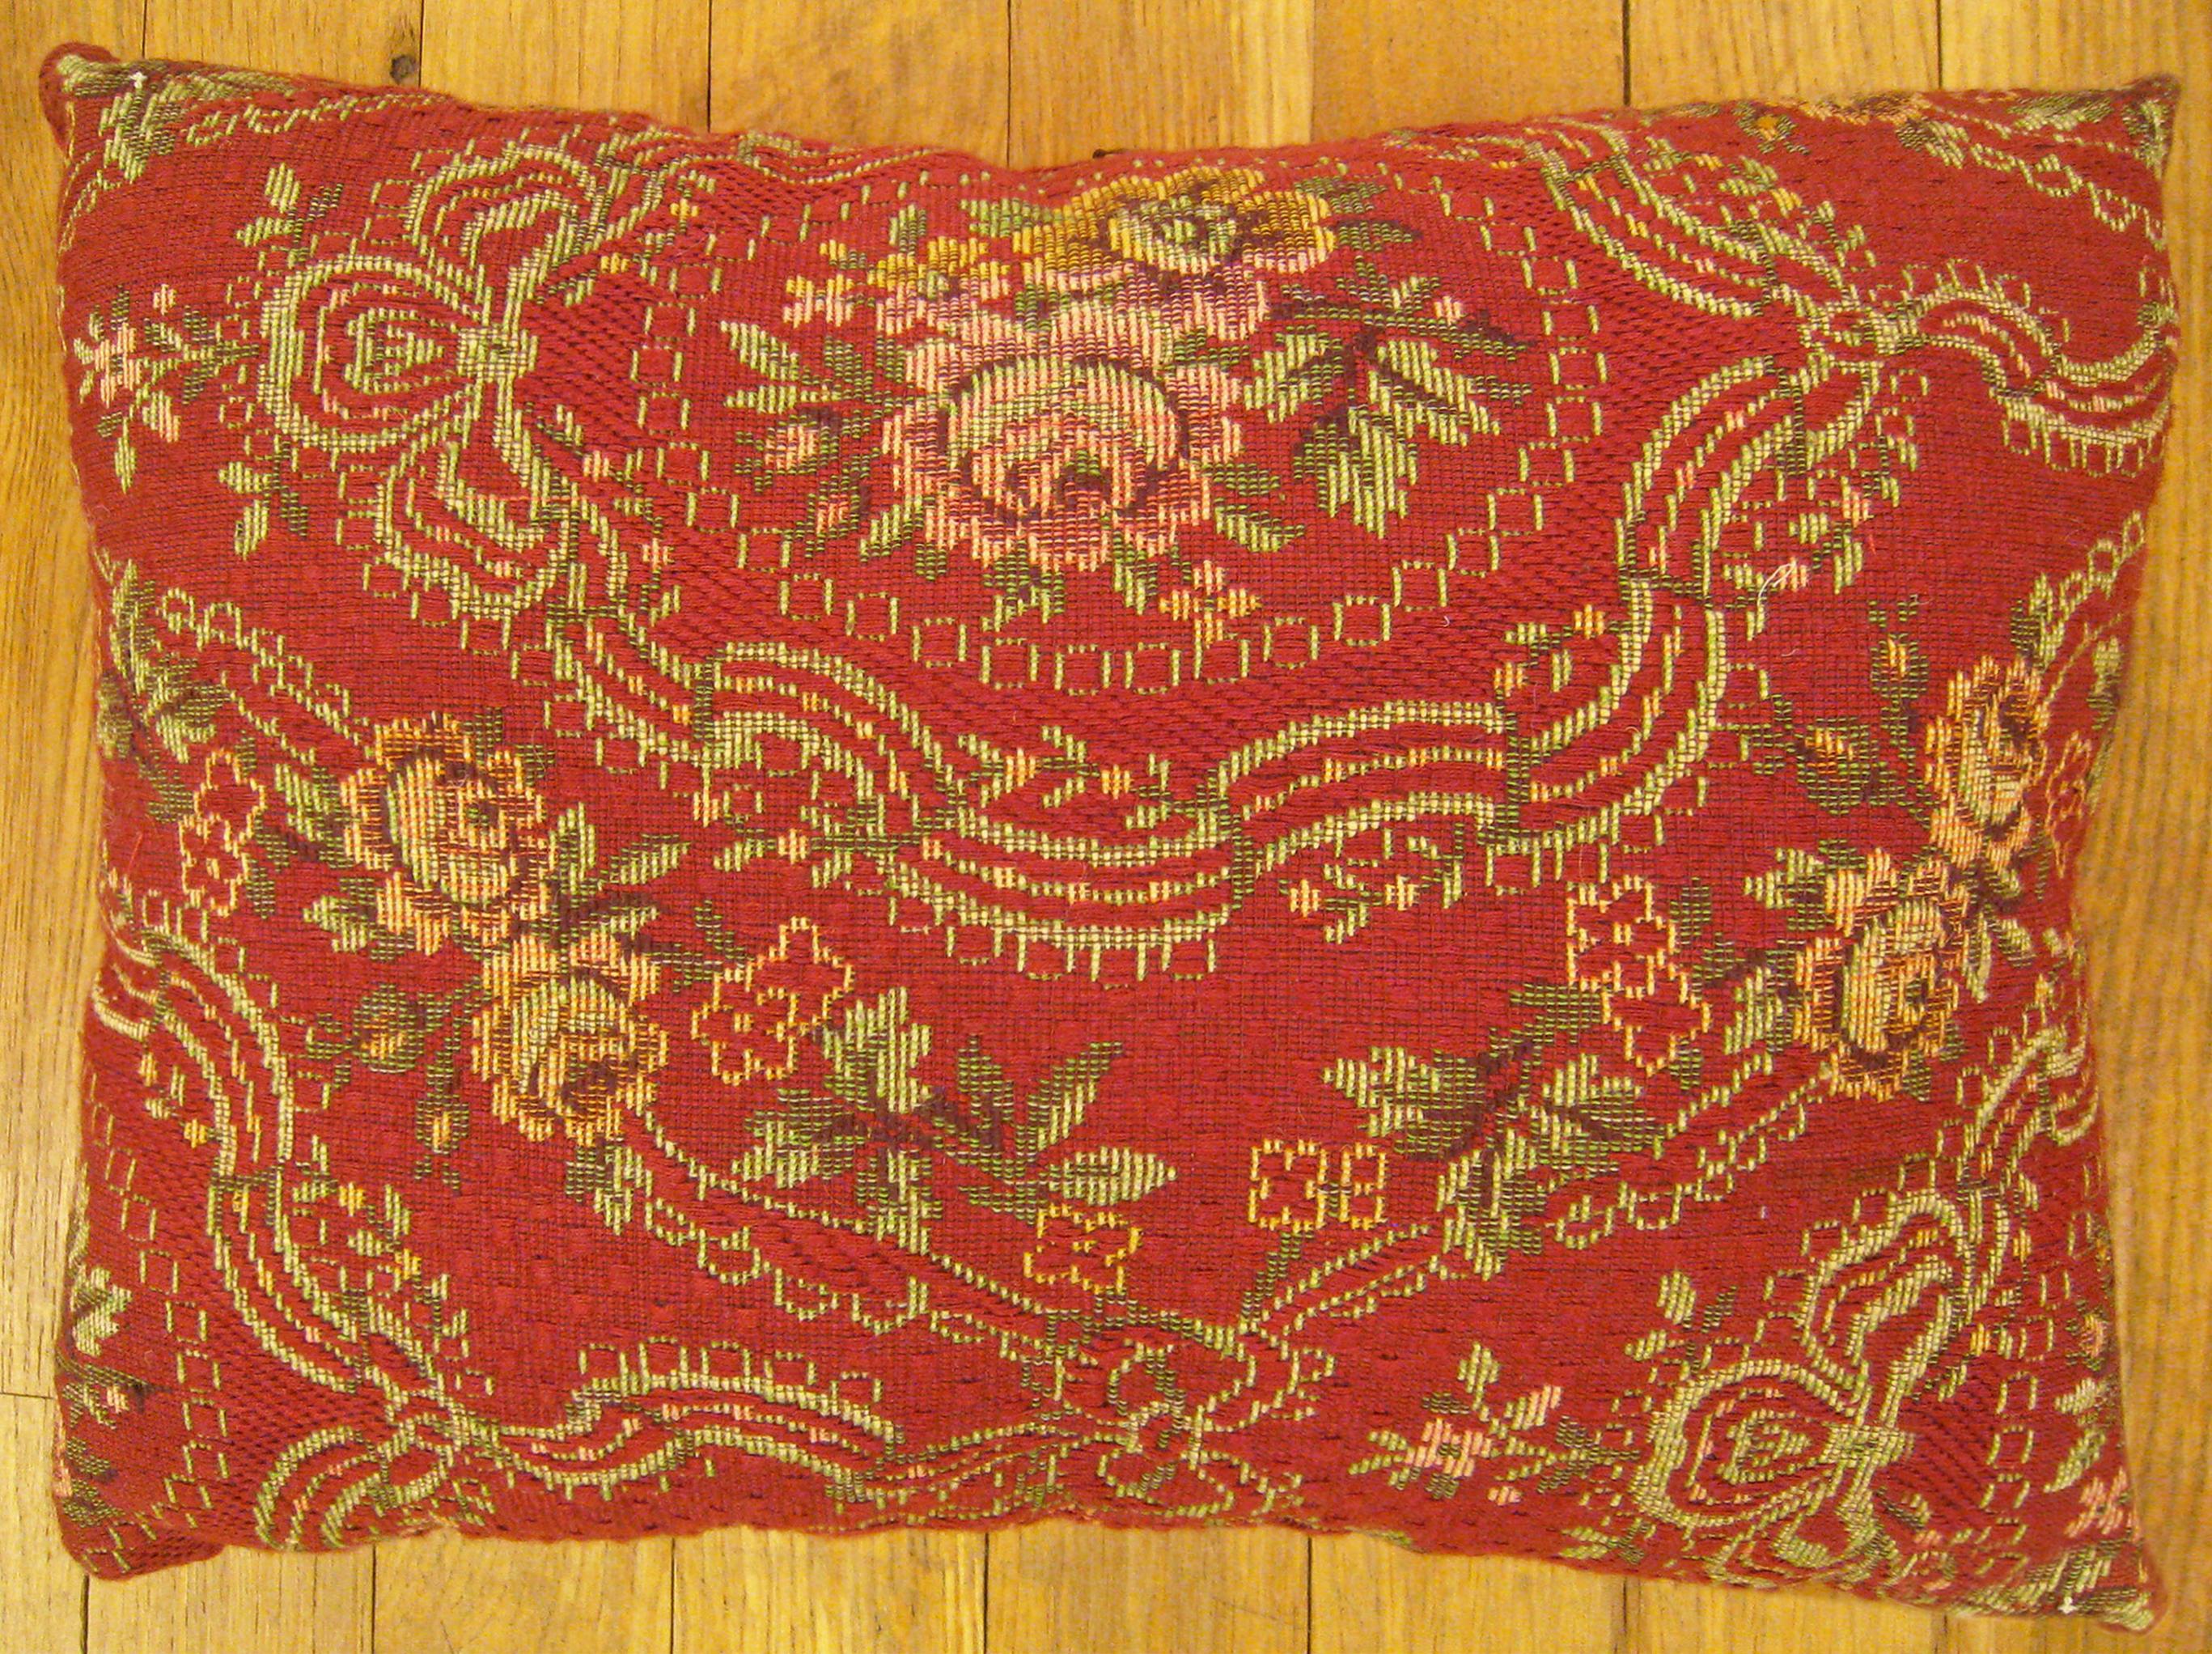 Antique Jacquard Tapestry pillow; size 1'0” x 1'3”.

An antique decorative pillow with floral elements allover a red central field, size 1'0